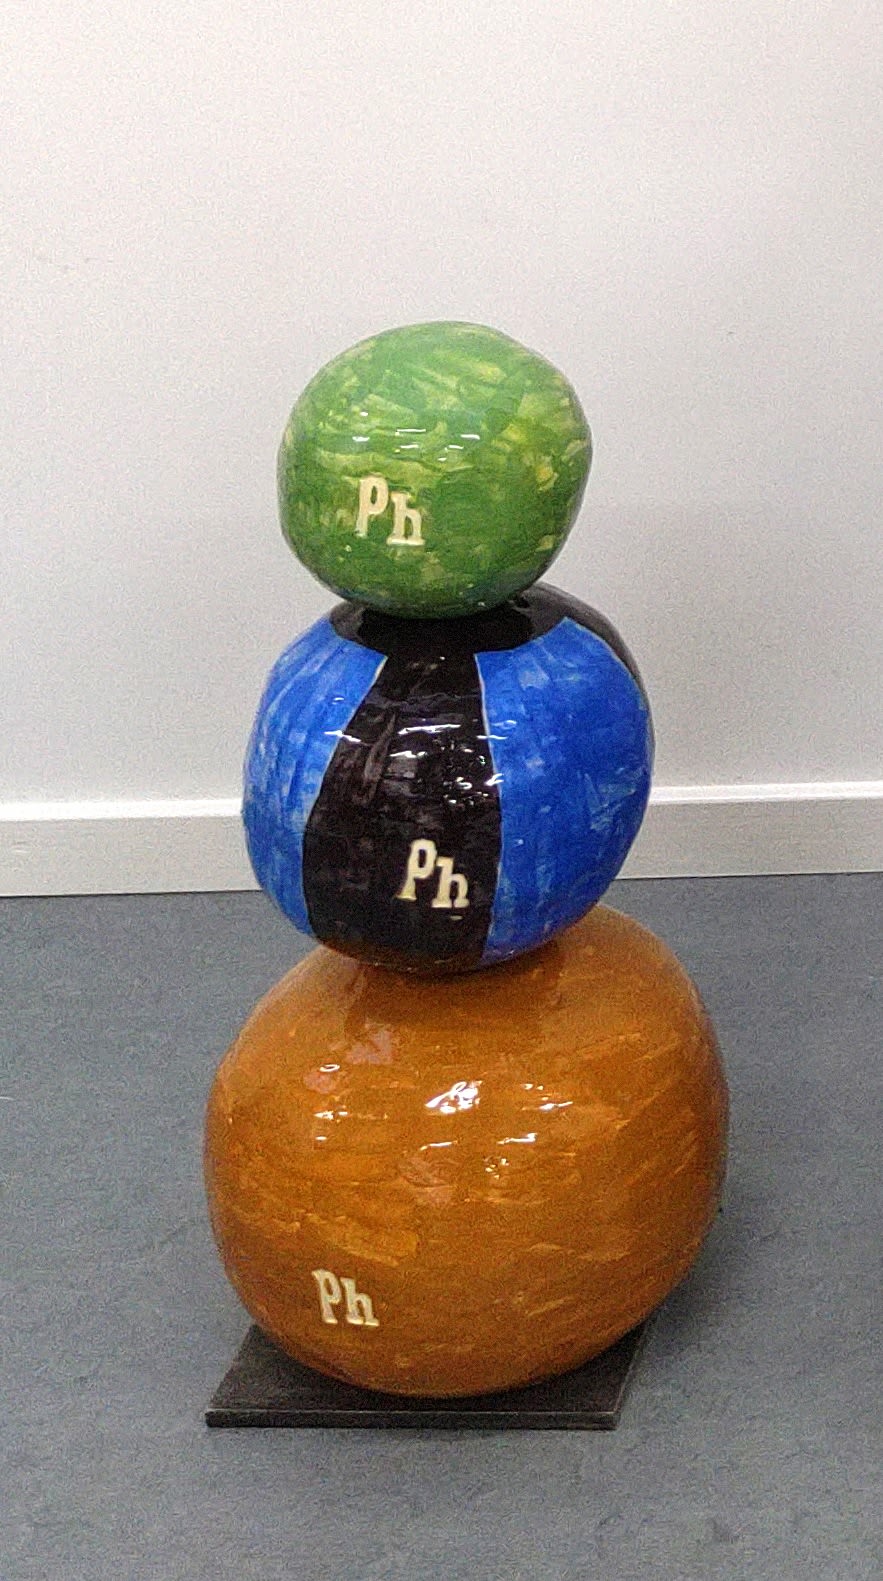 Polly Huyghe, Beach Ball Totem (small), 2021 - 2022